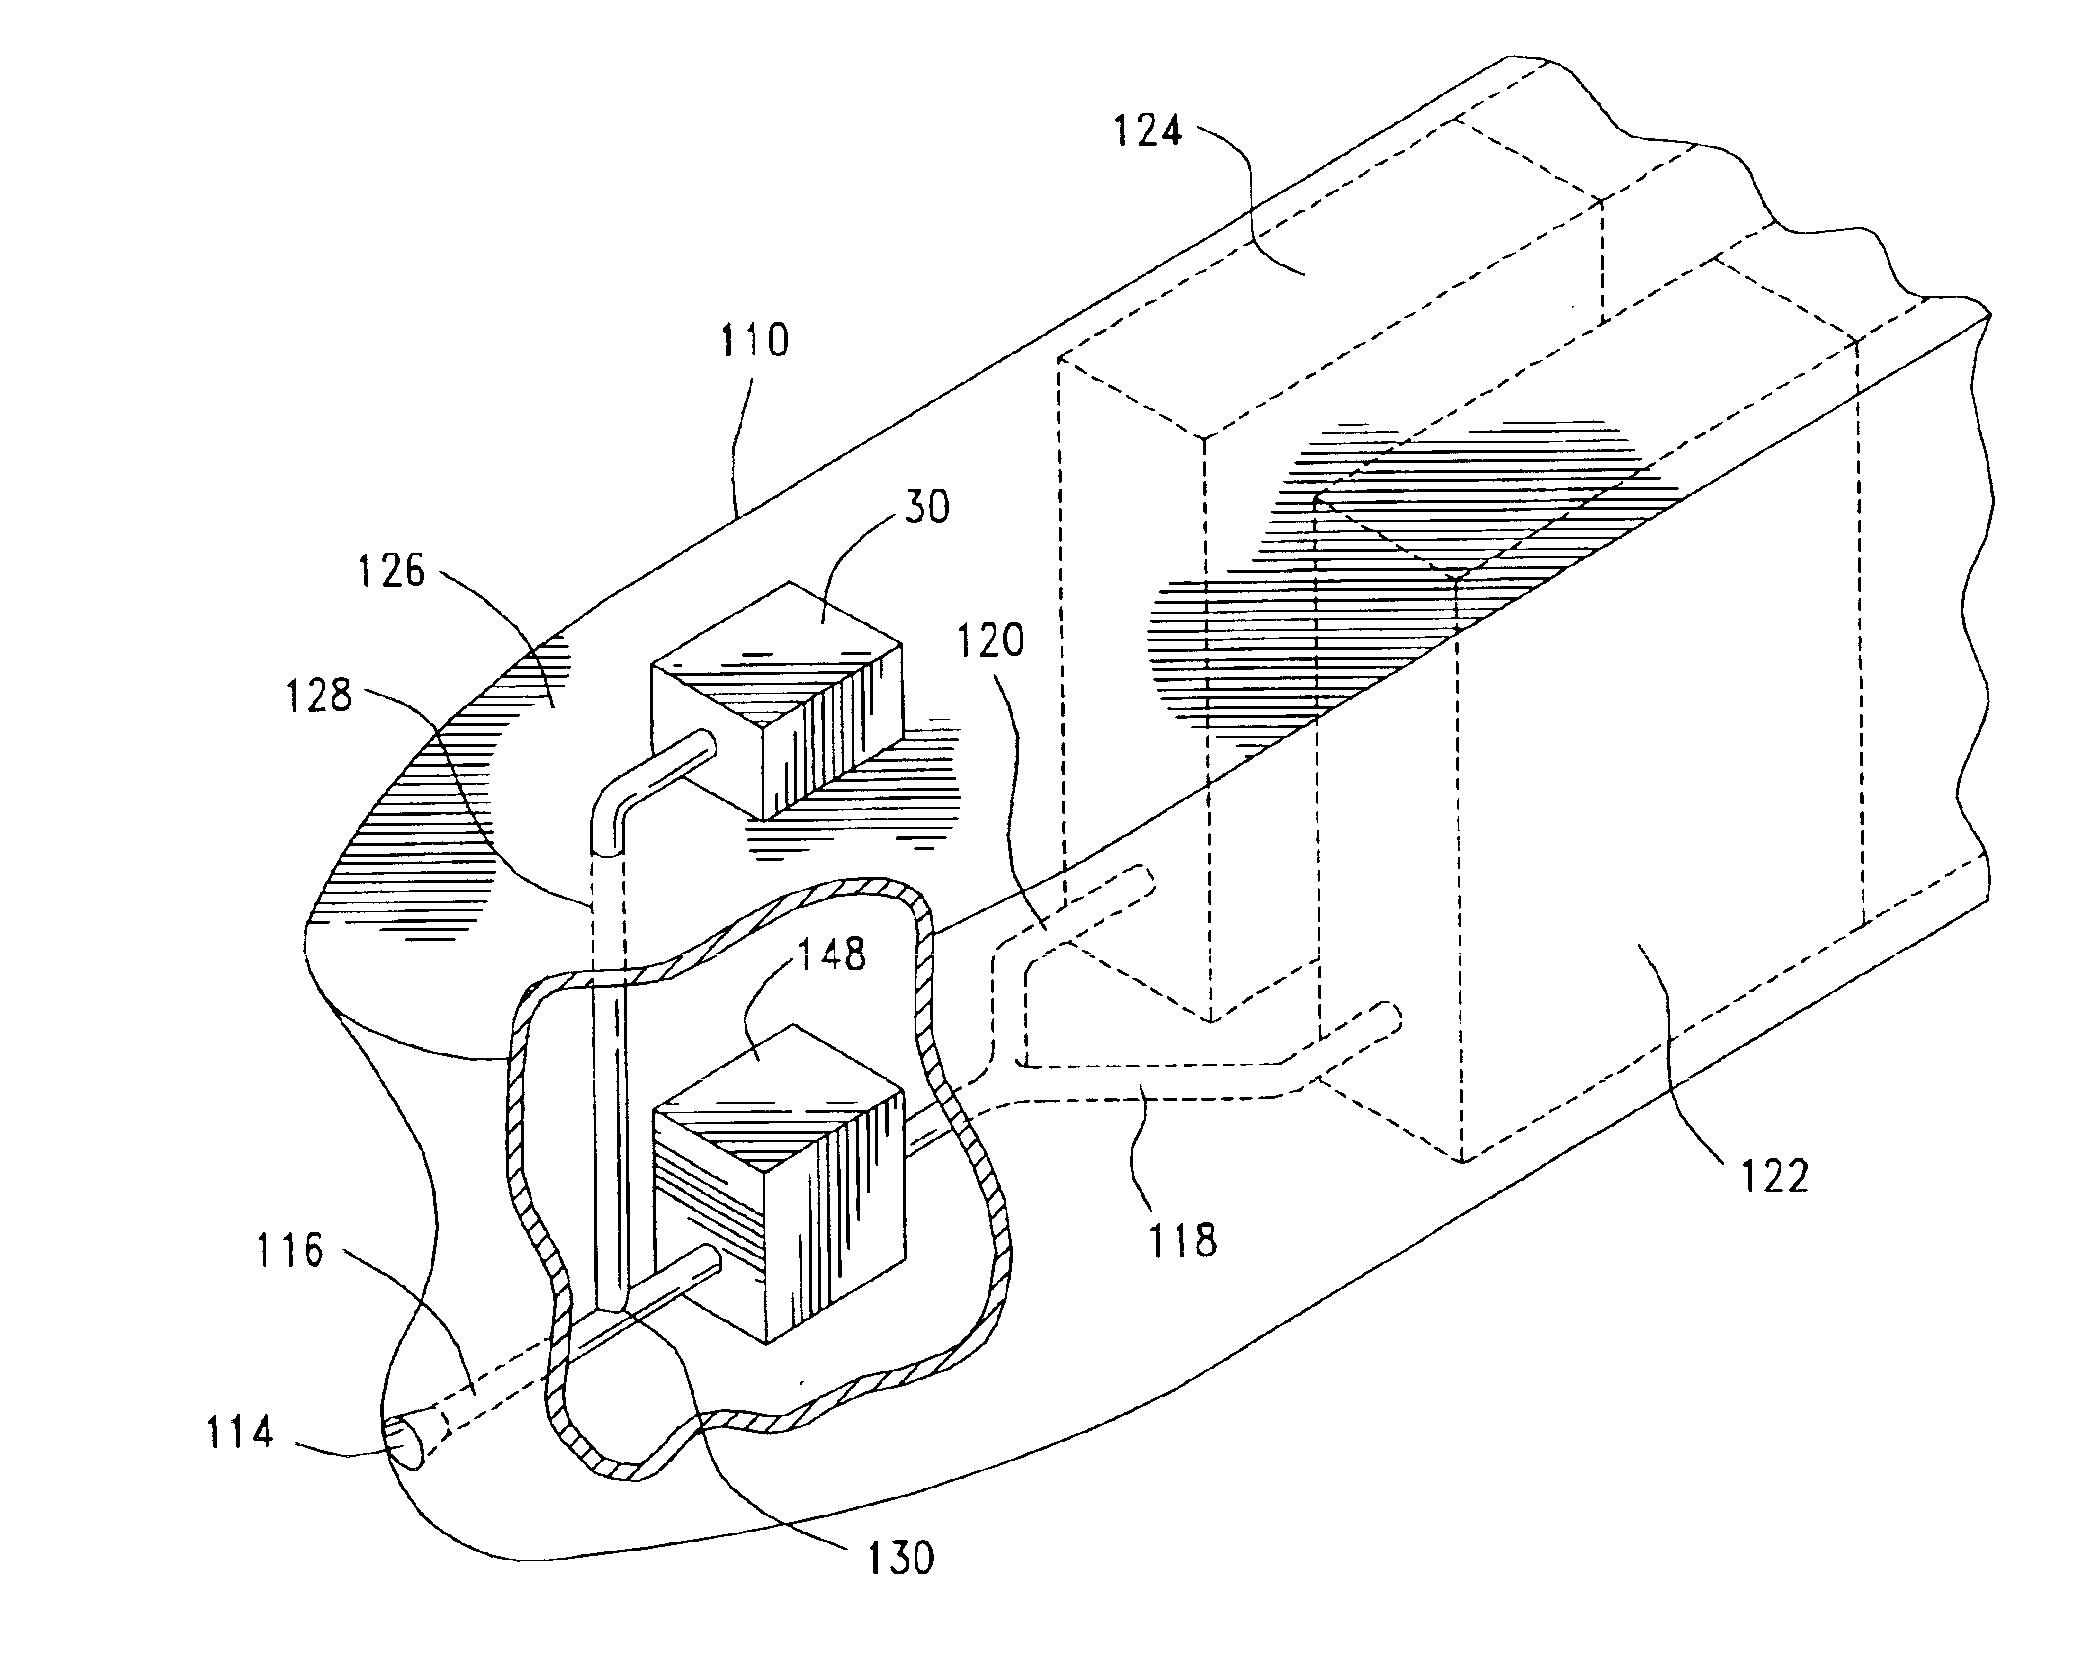 Ballast water ozone injection method and system